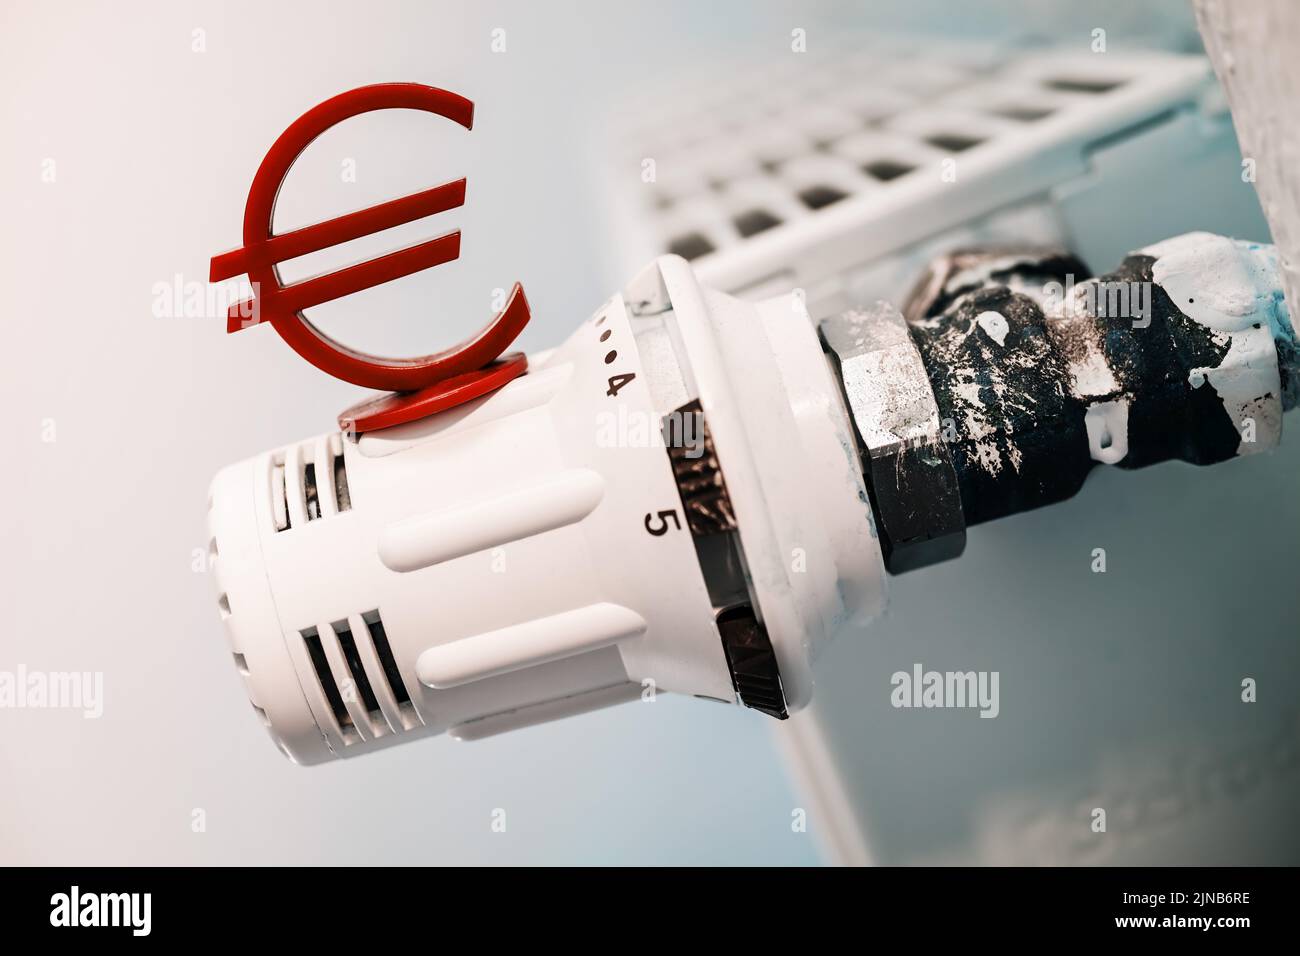 Euro Sign On Heating Thermostat, Symbol Photo Heating Costs And Gas Crisis Stock Photo